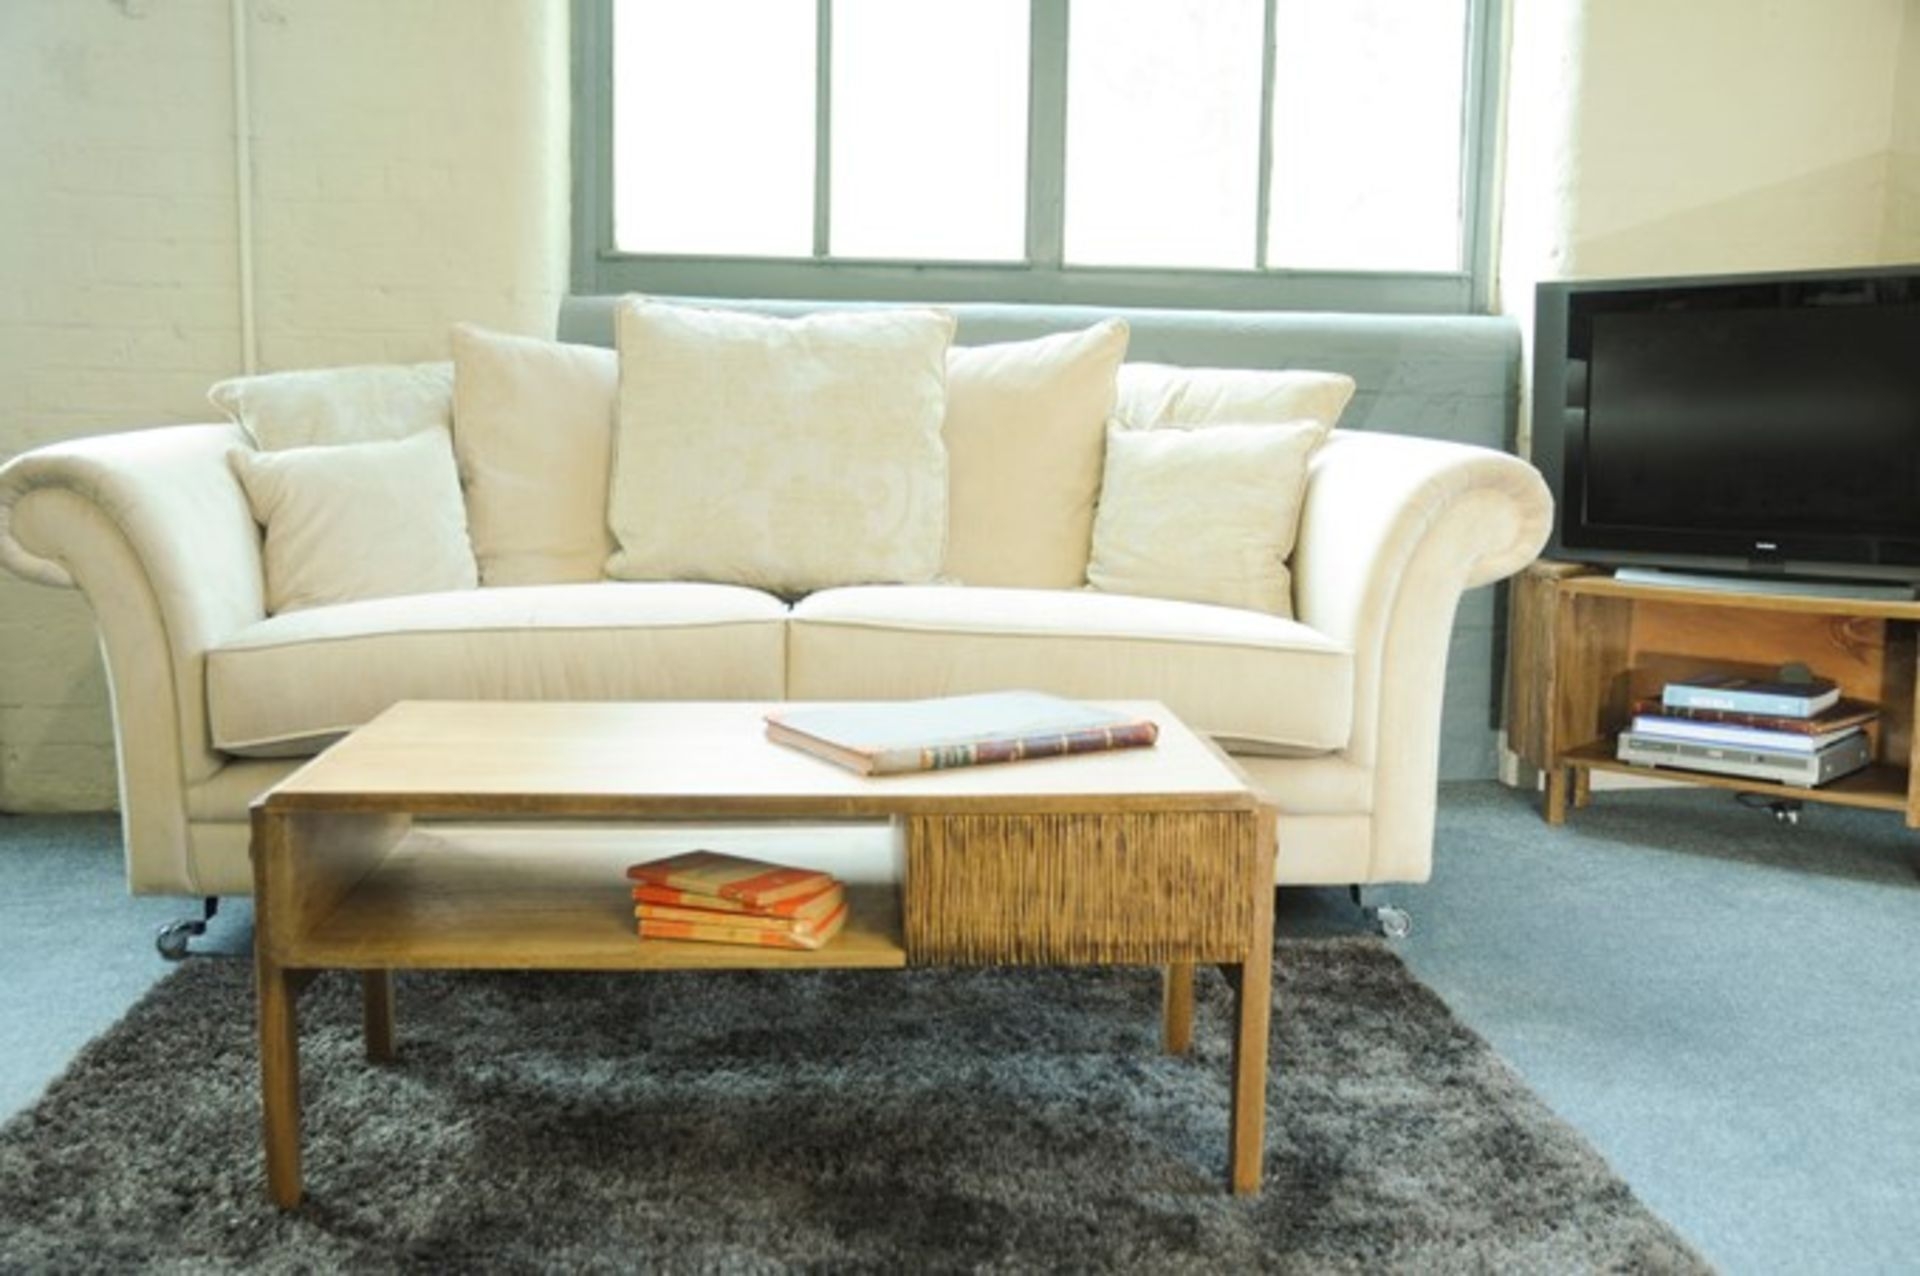 Ripple Mid Century Coffee Table Take Iconic Design And Beautiful Aesthetics To The Next Level With